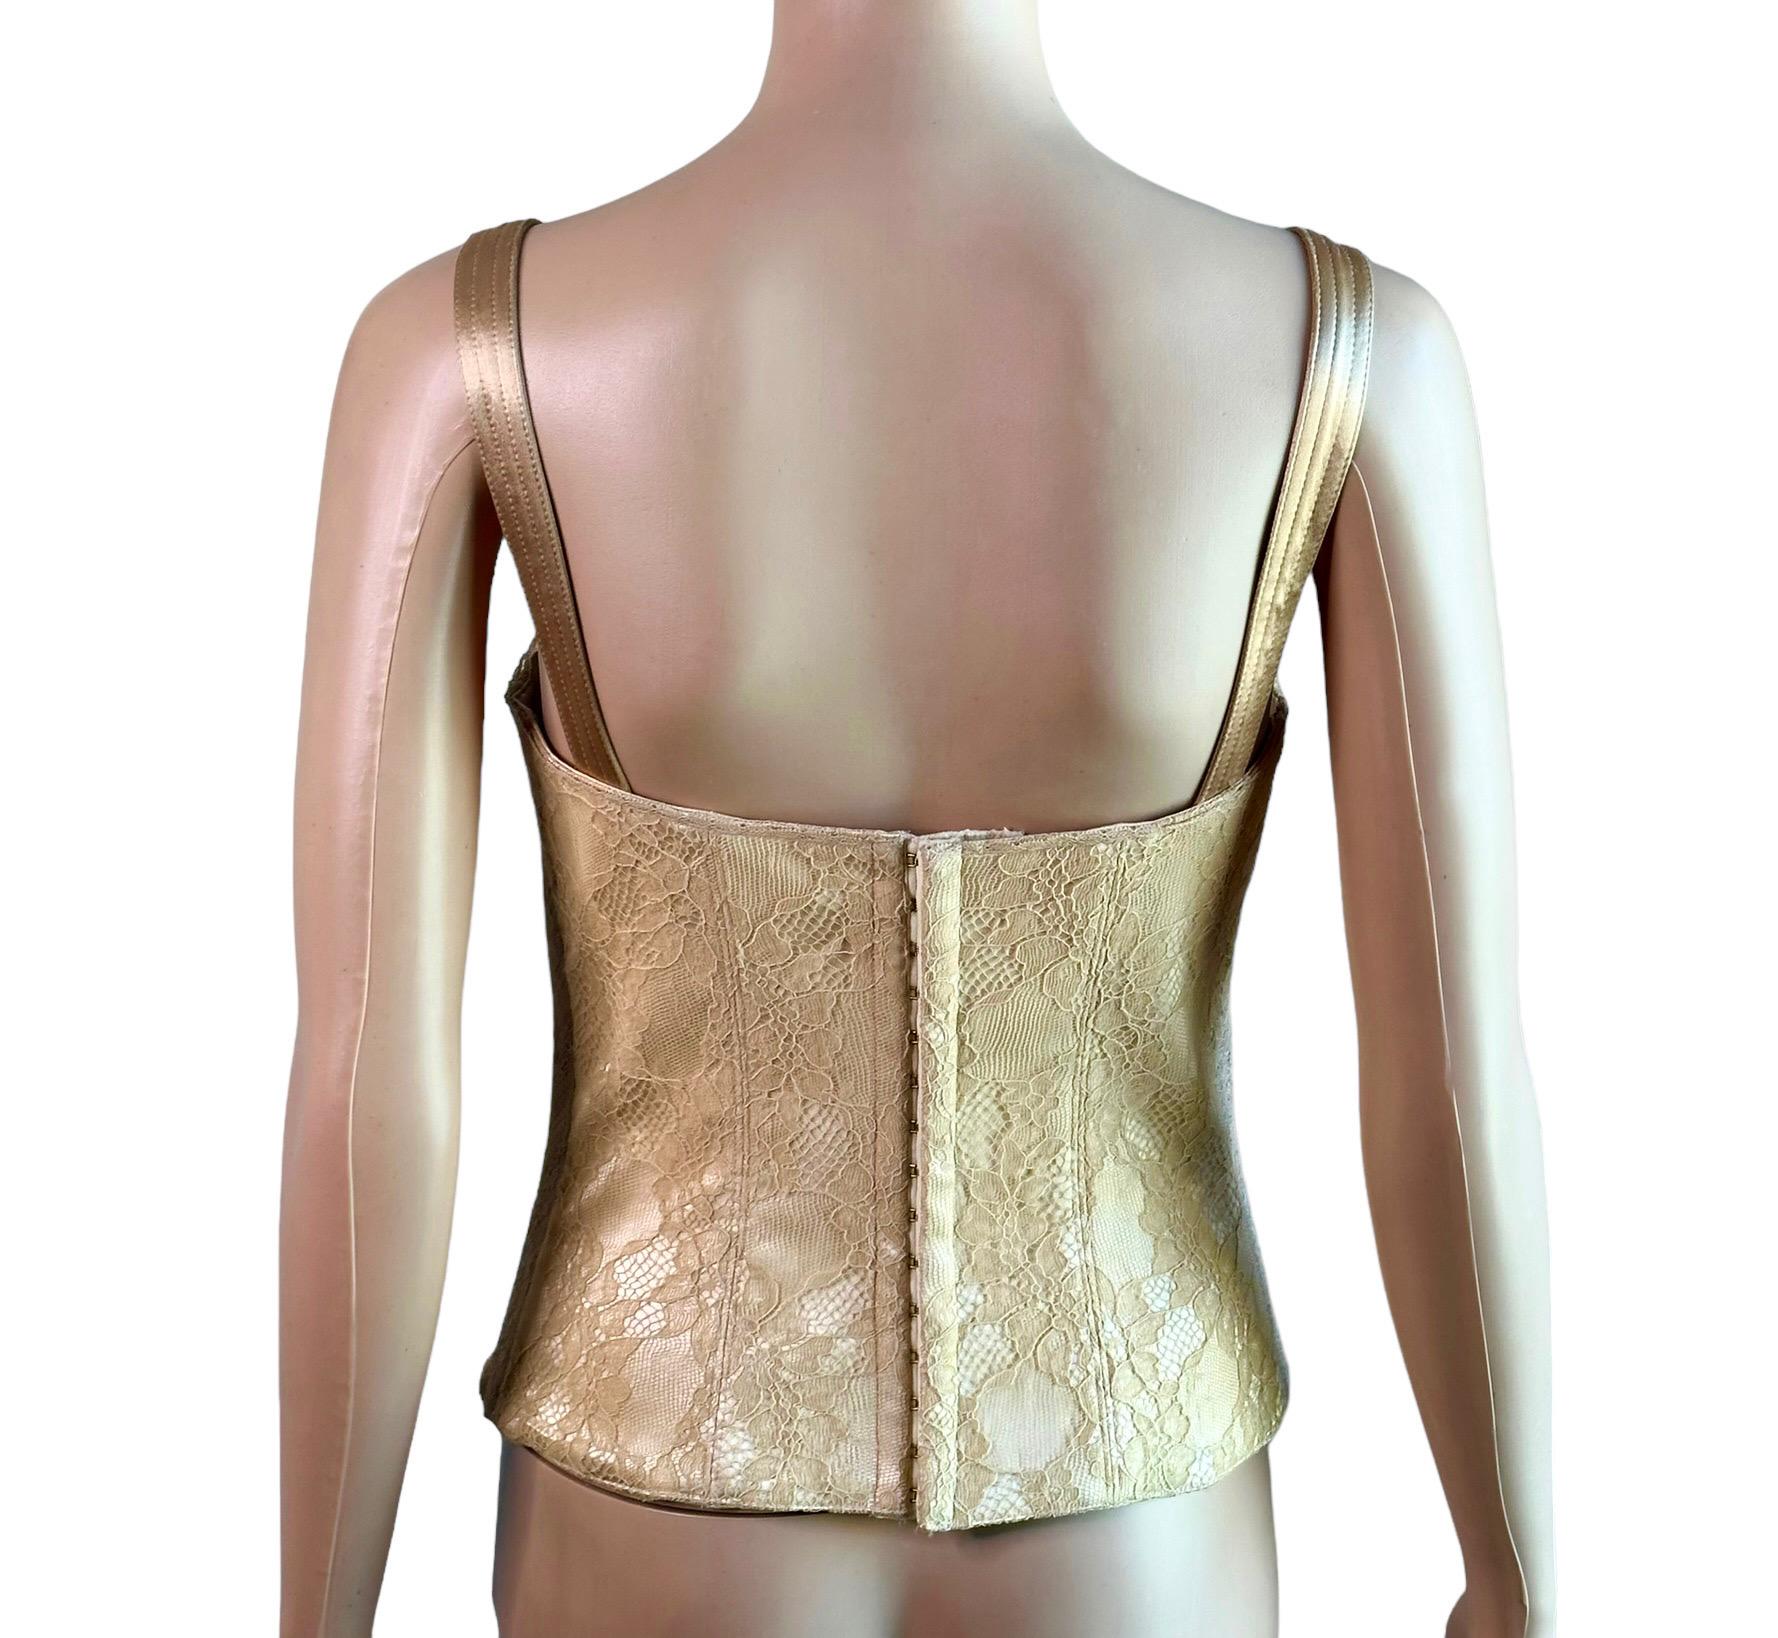 Christian Dior By John Galliano S/S 2004 Runway Bustier Lace Corset Crop Top For Sale 5